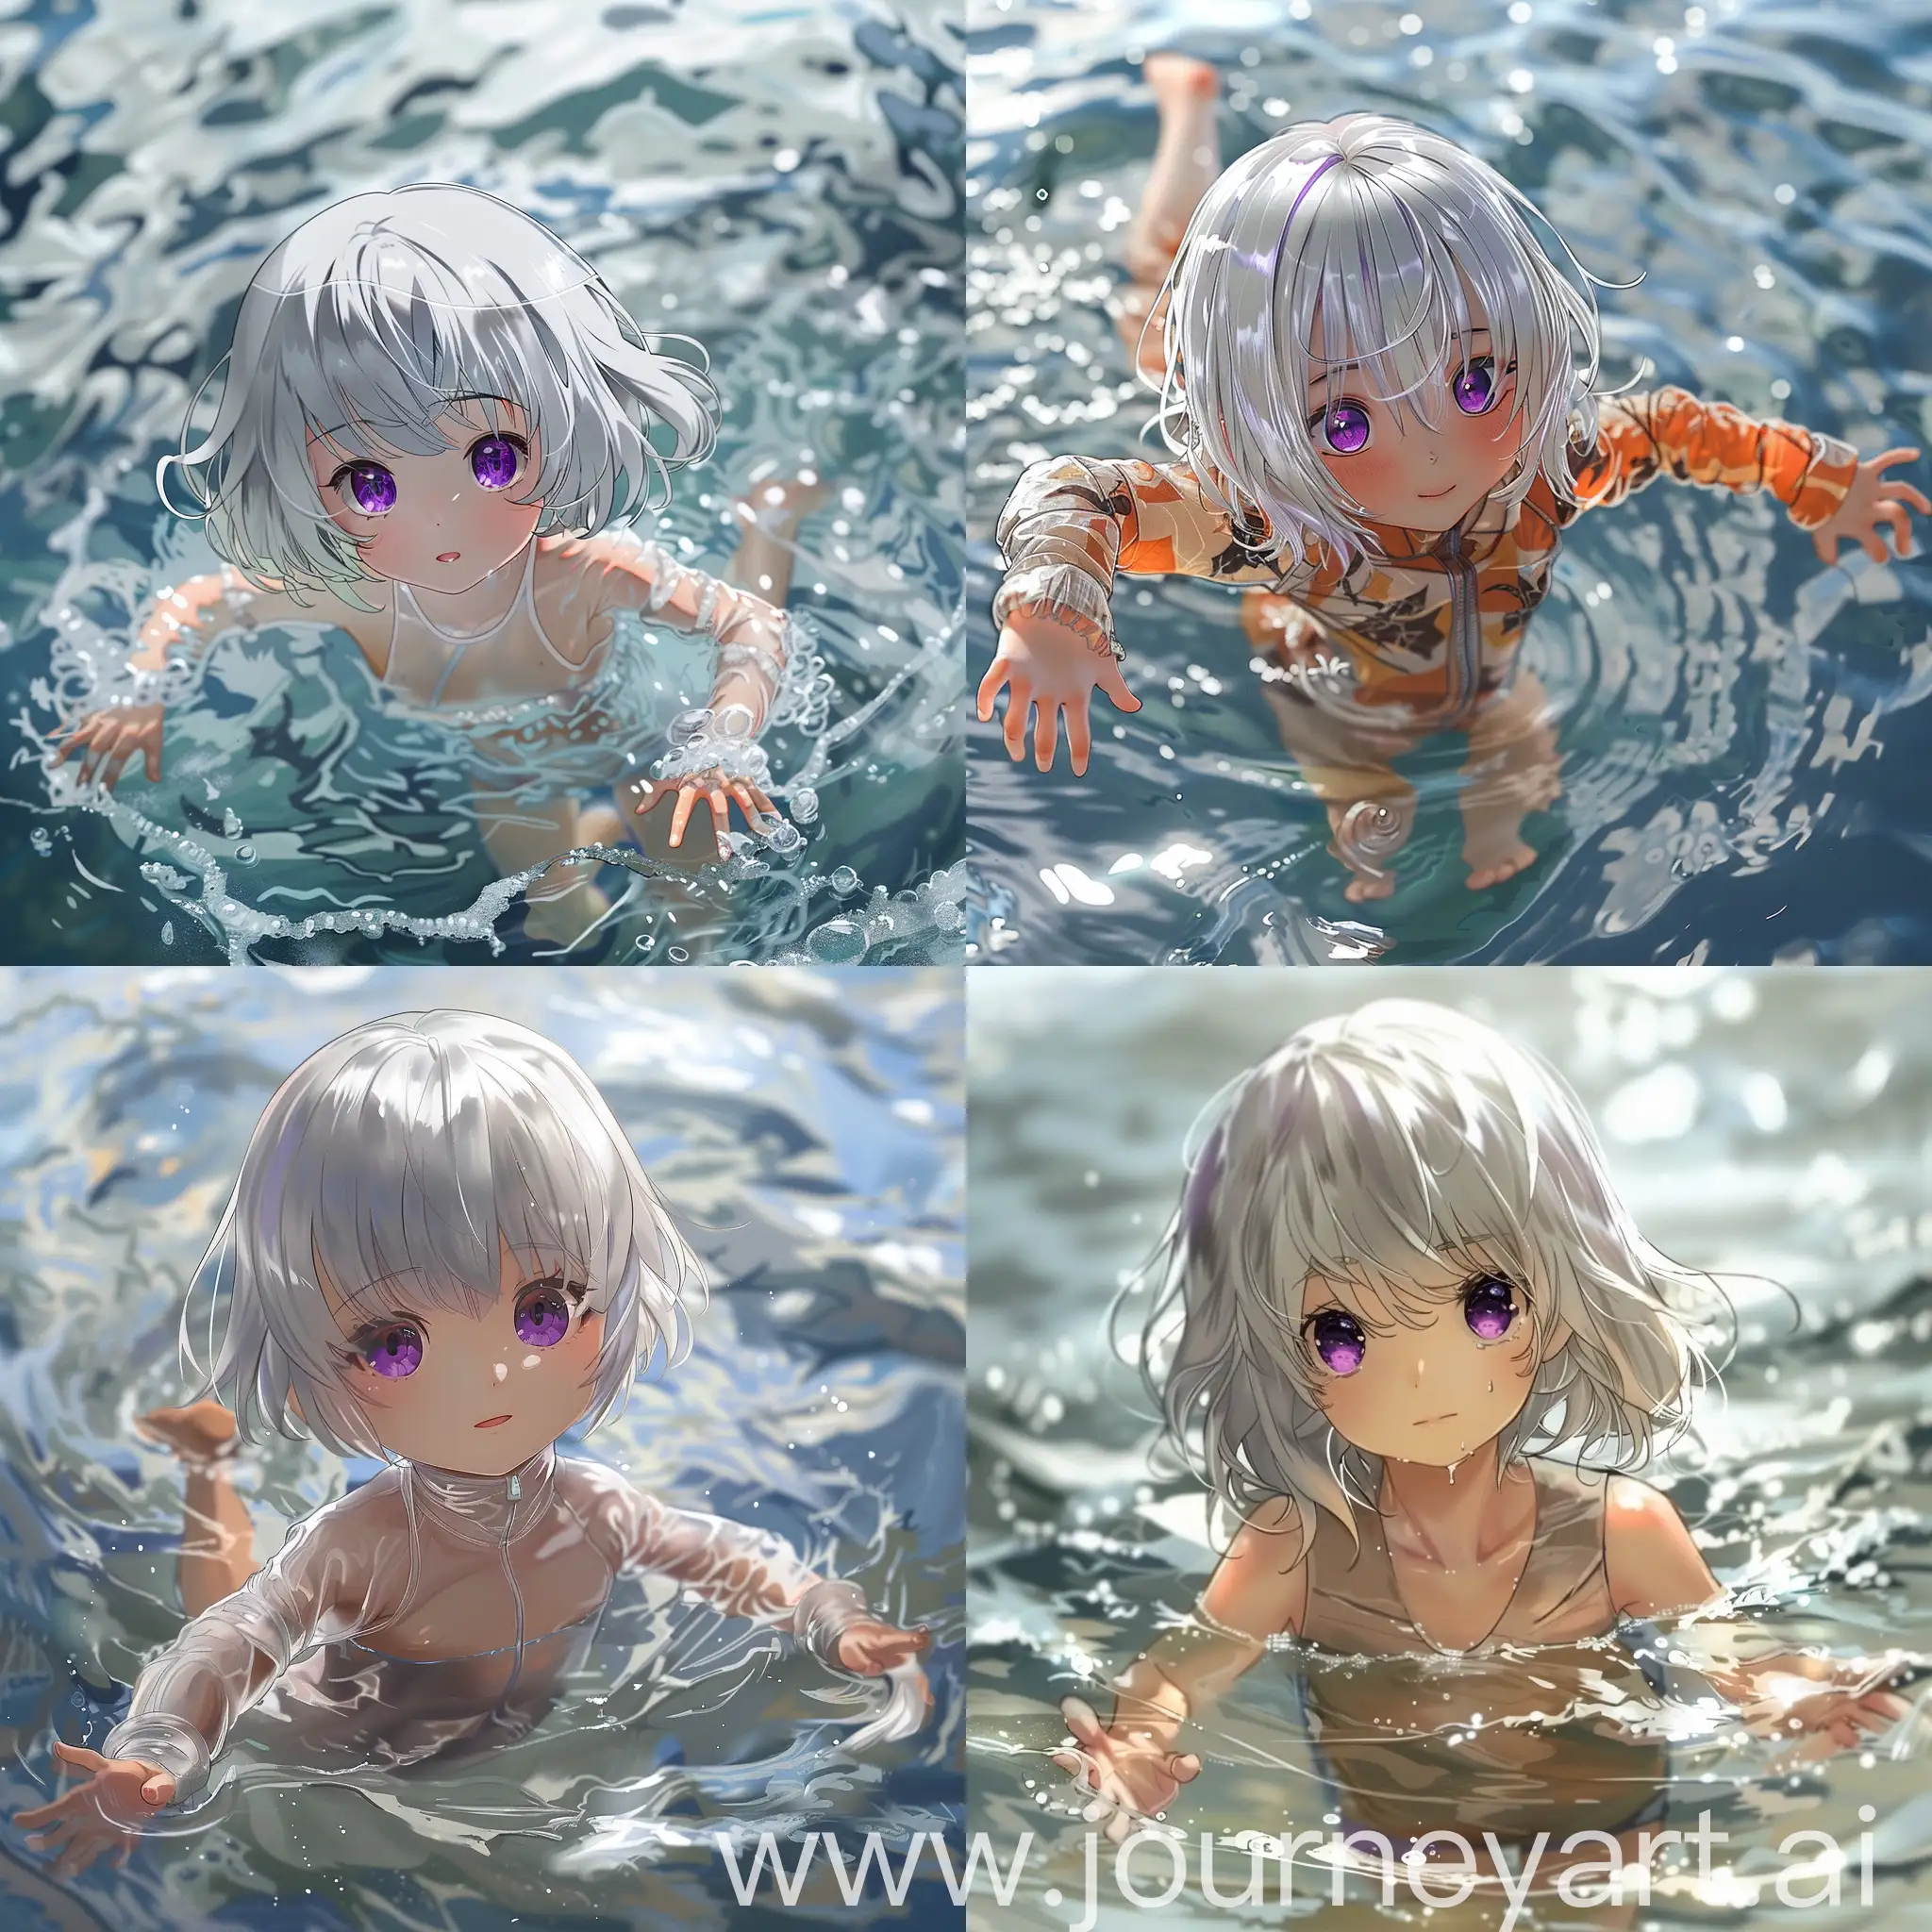 Graceful-SilverHaired-Girl-in-Transparent-Sun-Protection-Suit-Swimming